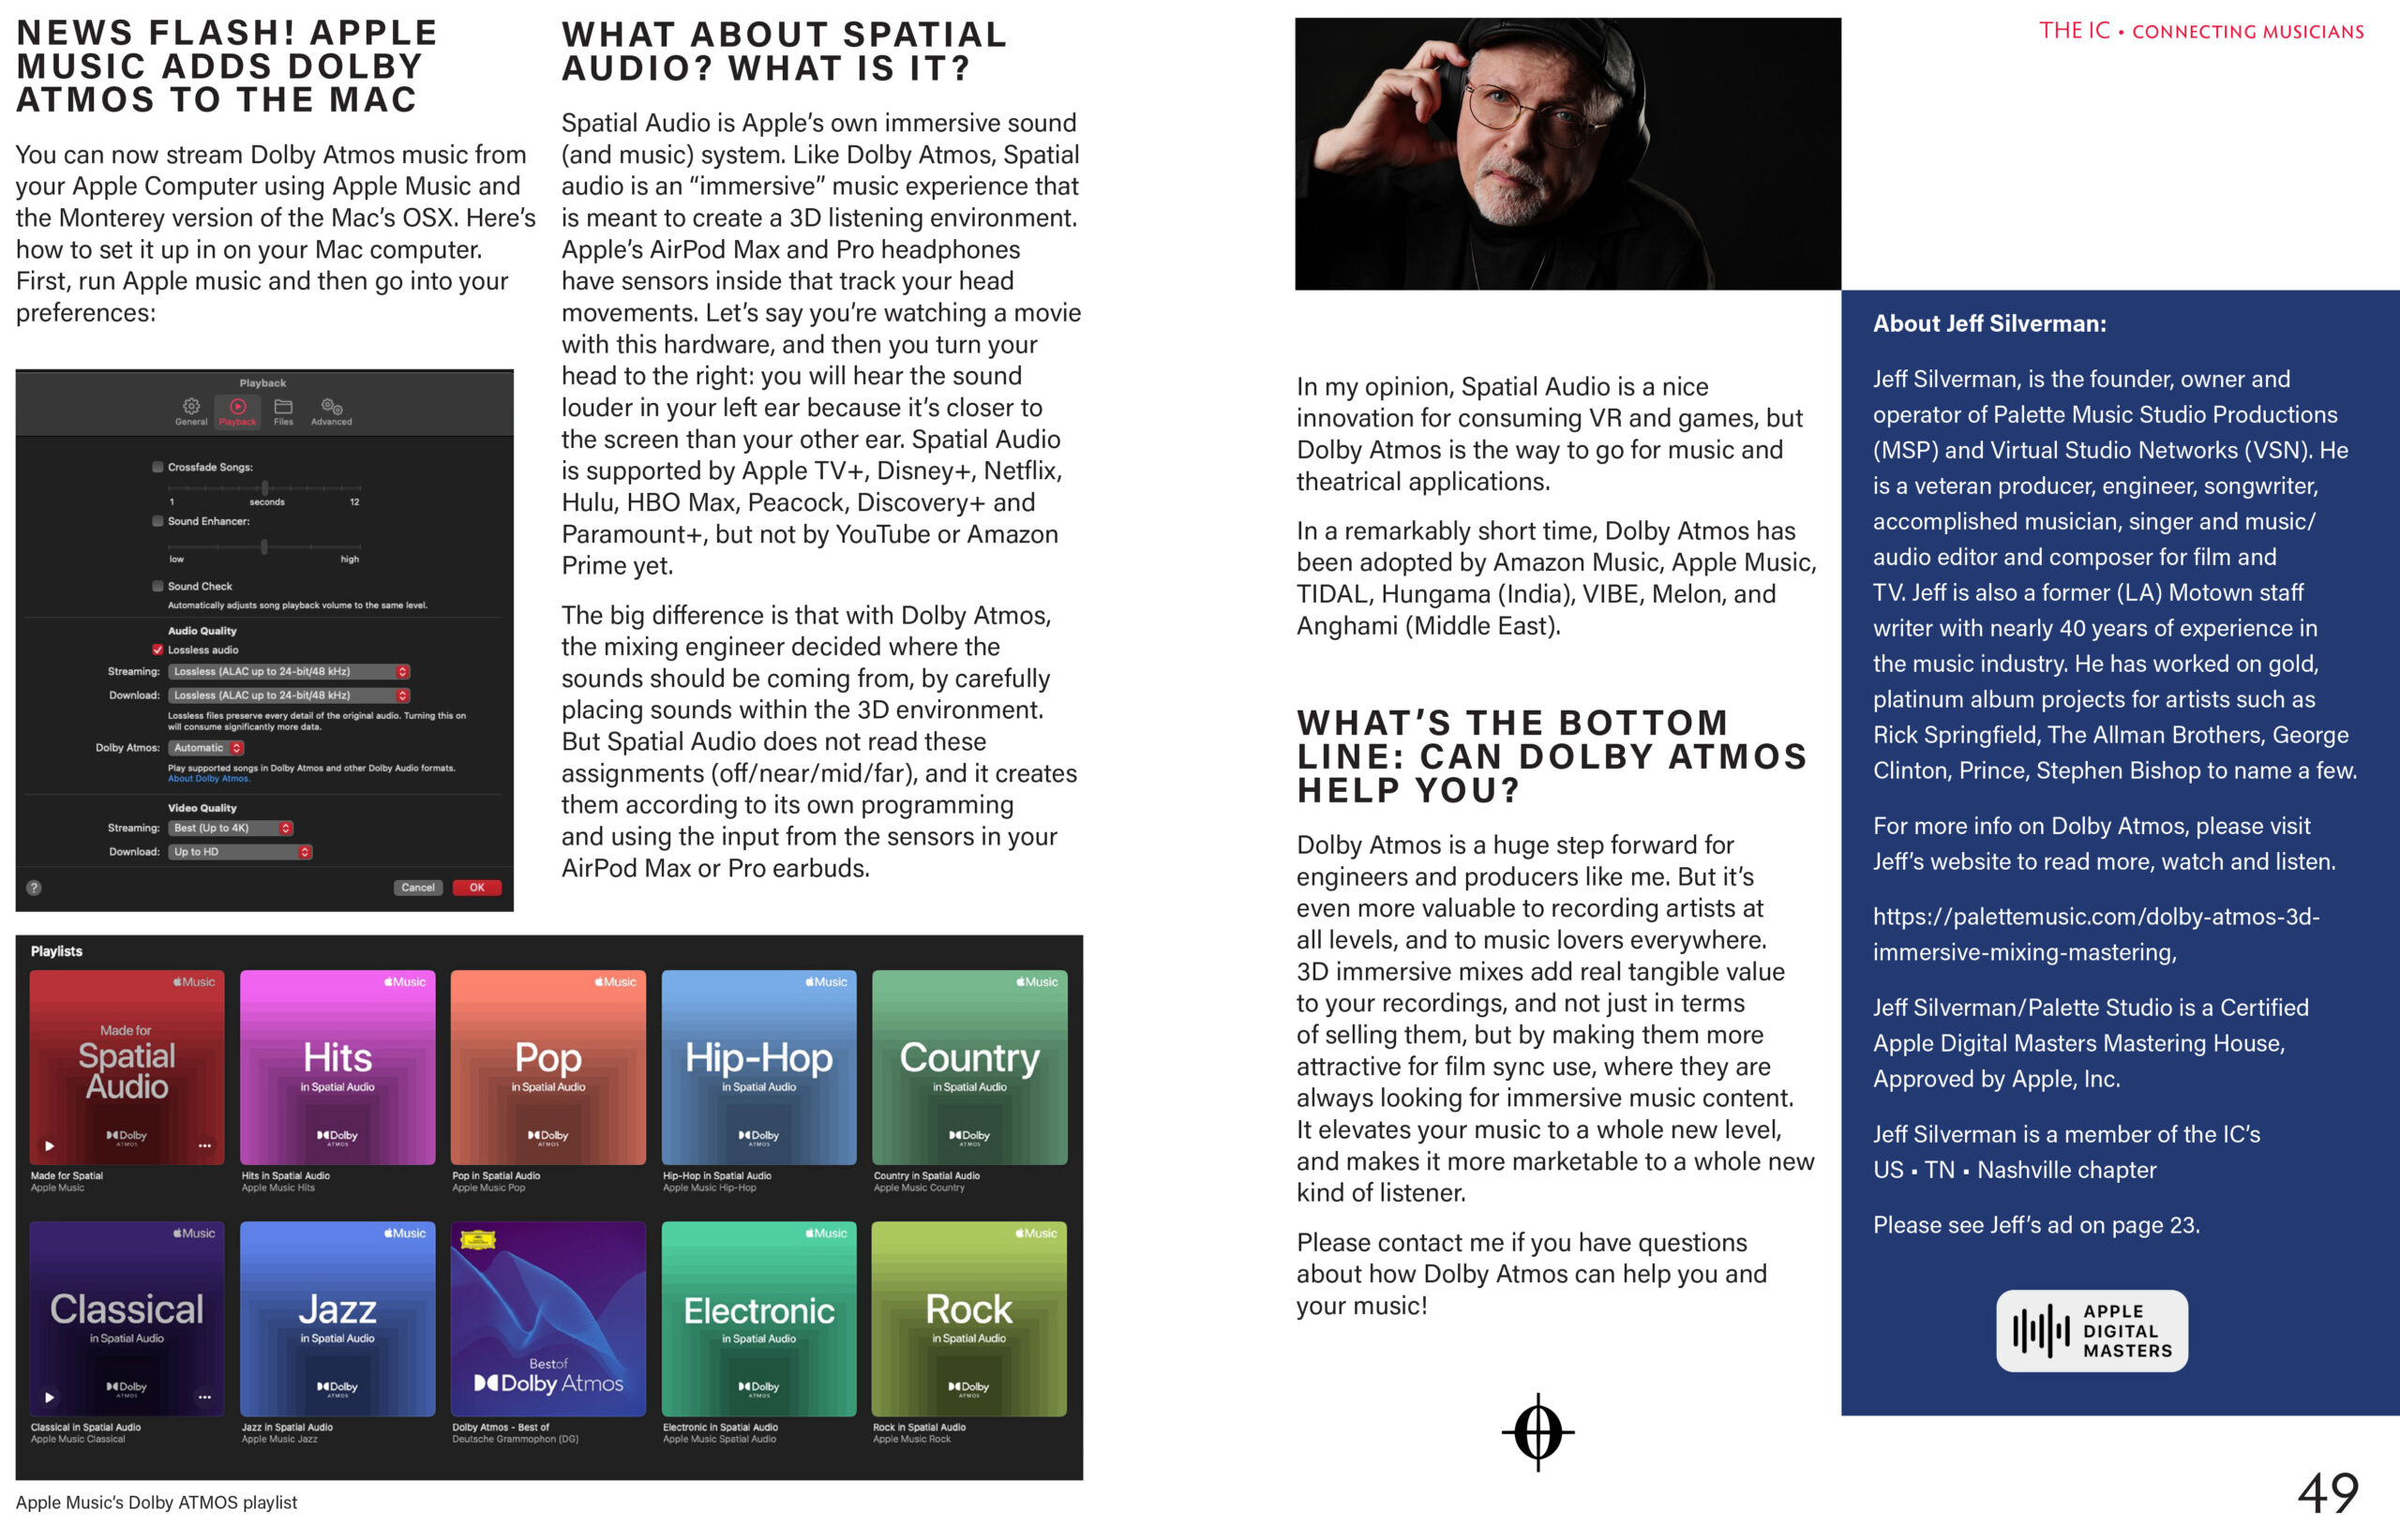 PAGE 3 WHY DOLBY ATMOS -JEFF SILVERMAN - THE IC 2022 Article - PALETTE MUSIC STUDIO PRODUCTIONS- NASHVILLE TN